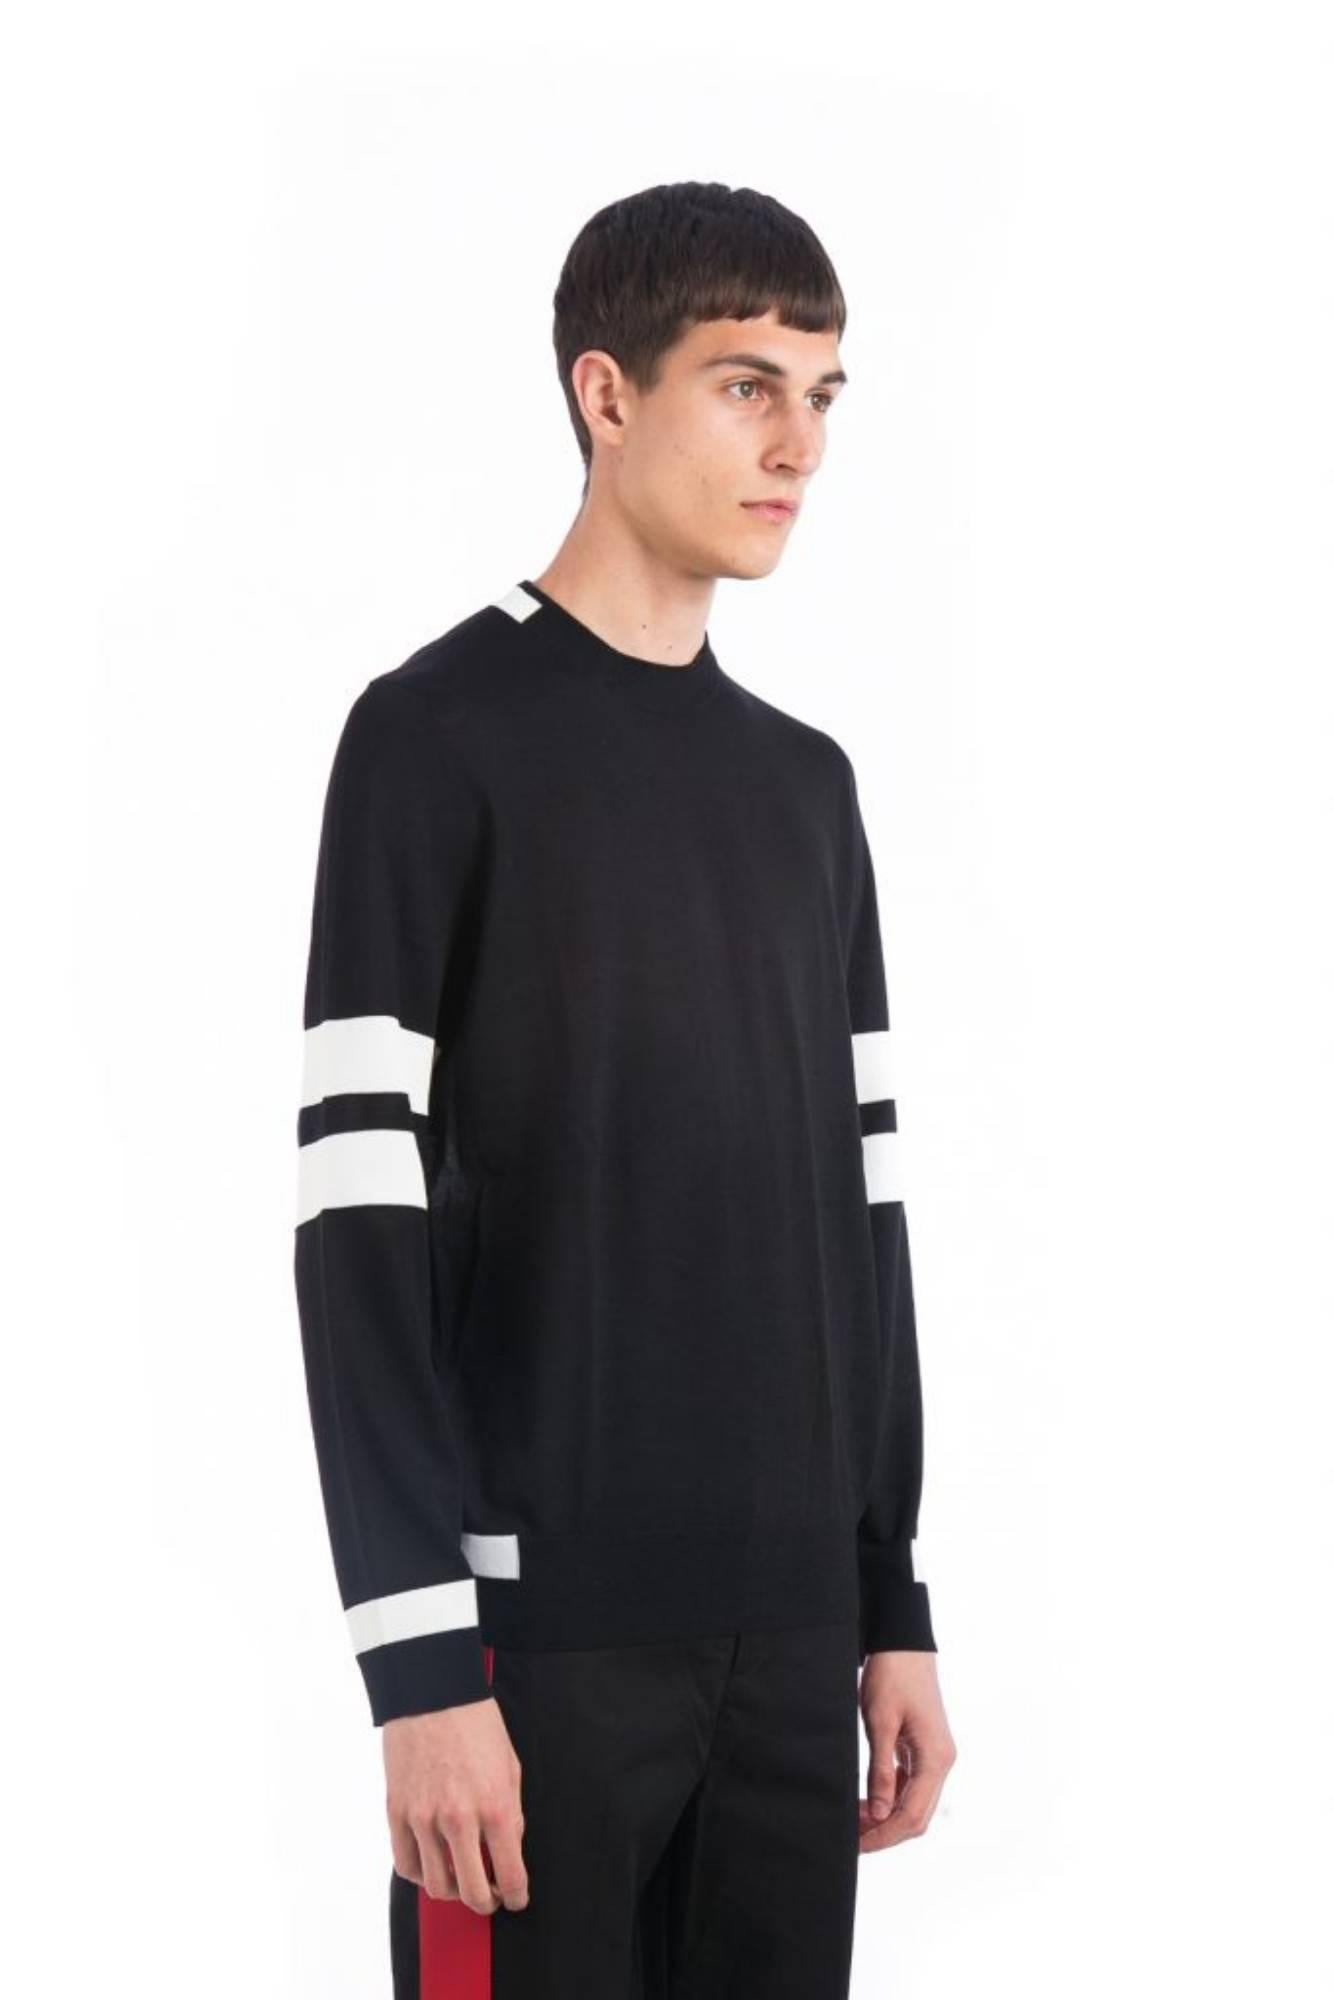 Striped Sweater
Black and white sweater
Slim fit
Colour block design
Ribbed crew neck
Long sleeves
Composition 100% cotton